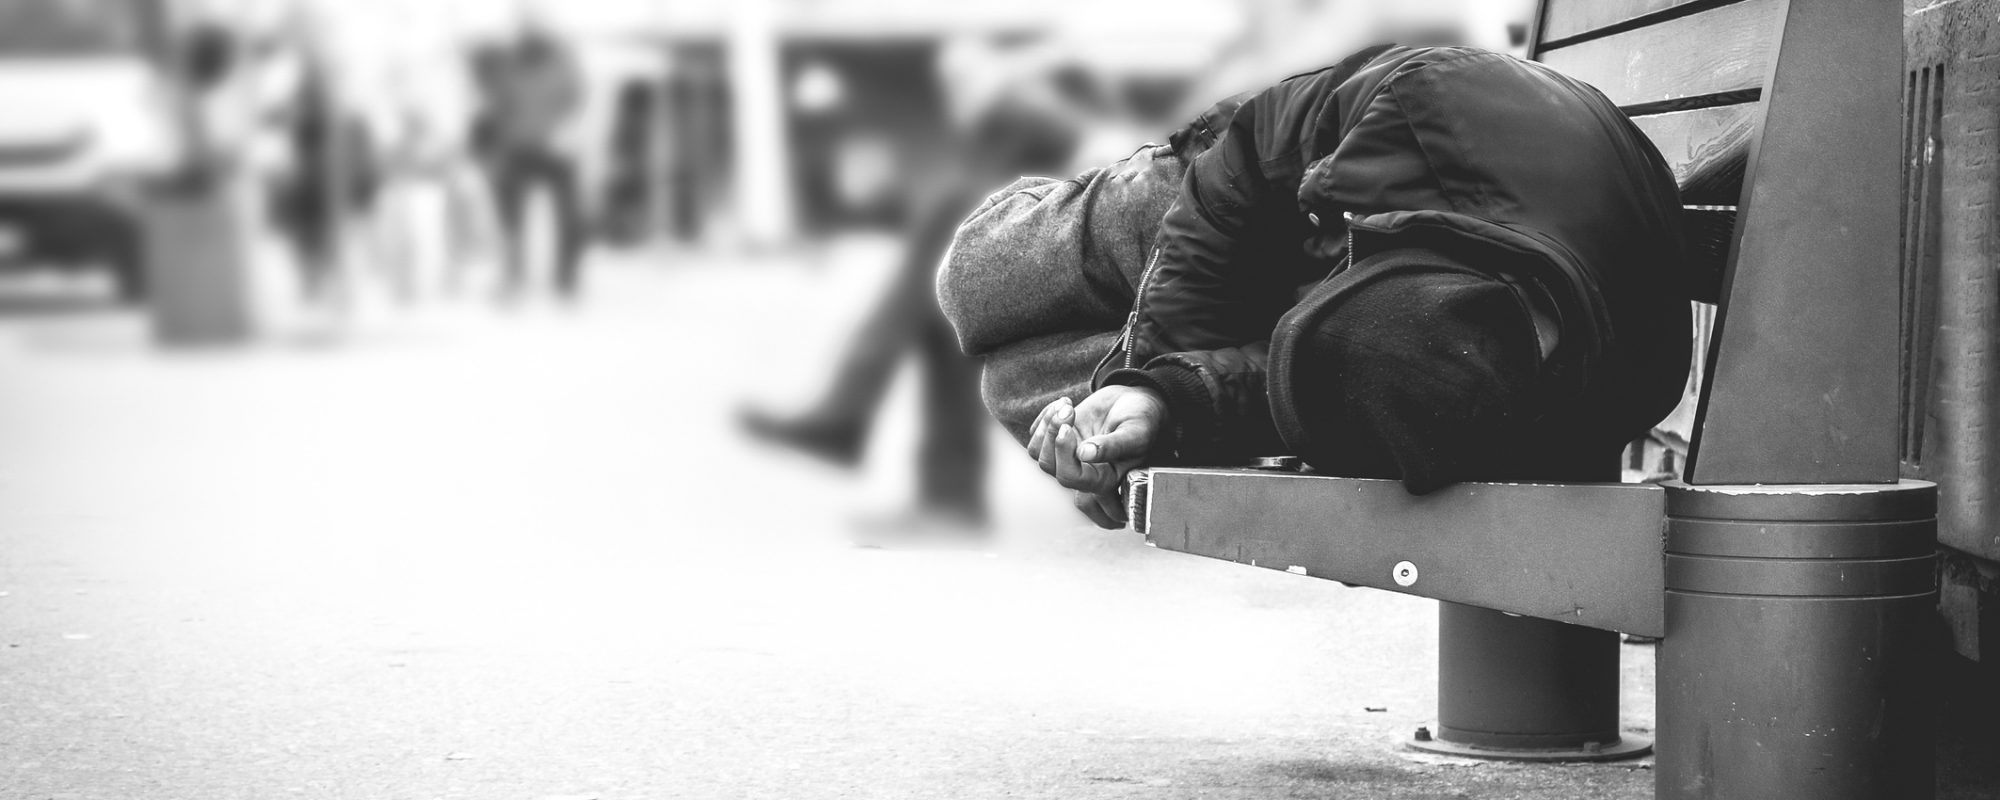 Poor homeless man or refugee sleeping on the wooden bench on the urban street in the city, social documentary concept, selective focus, black and white